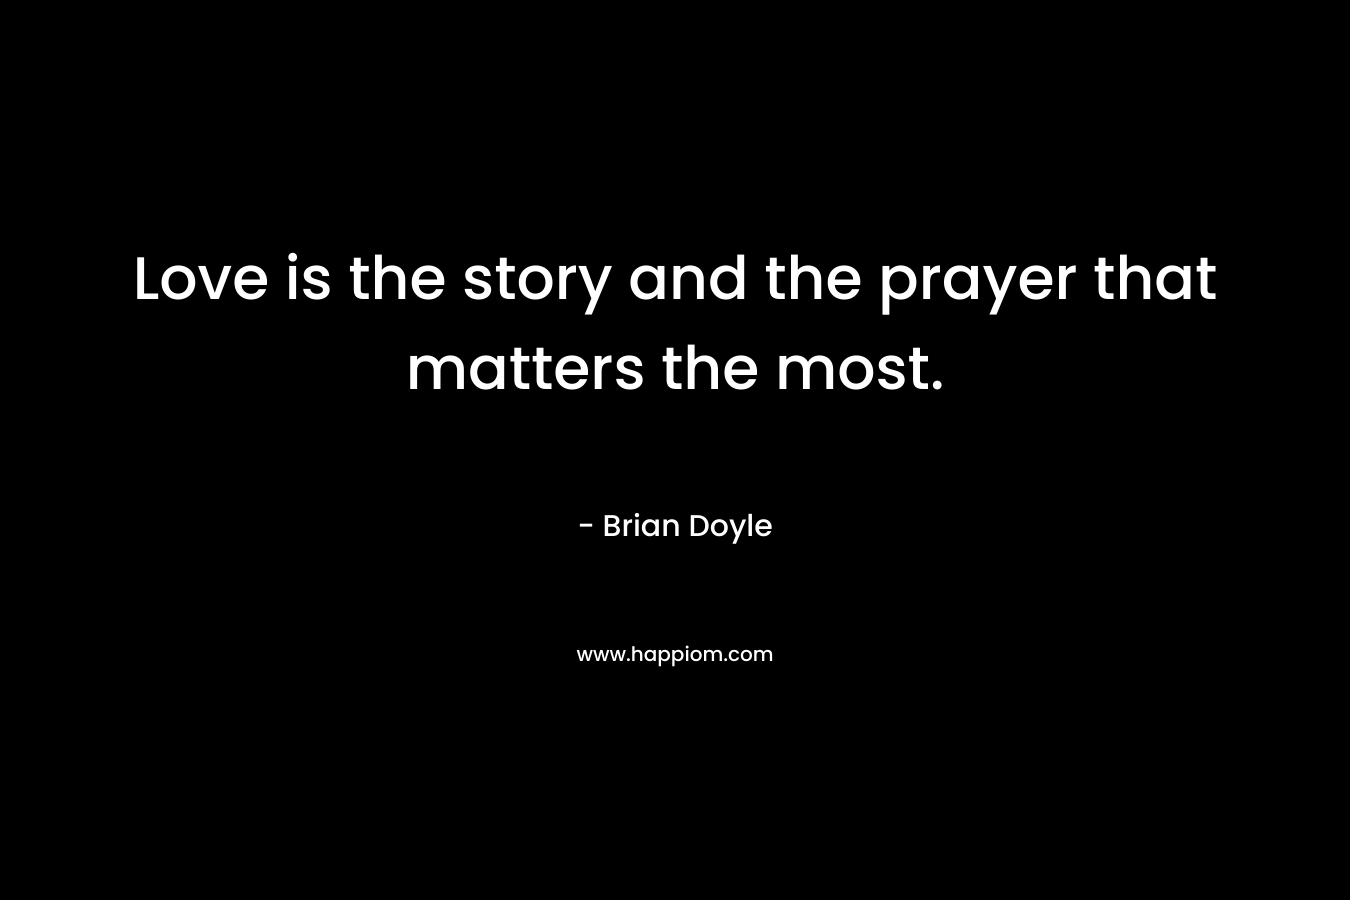 Love is the story and the prayer that matters the most.